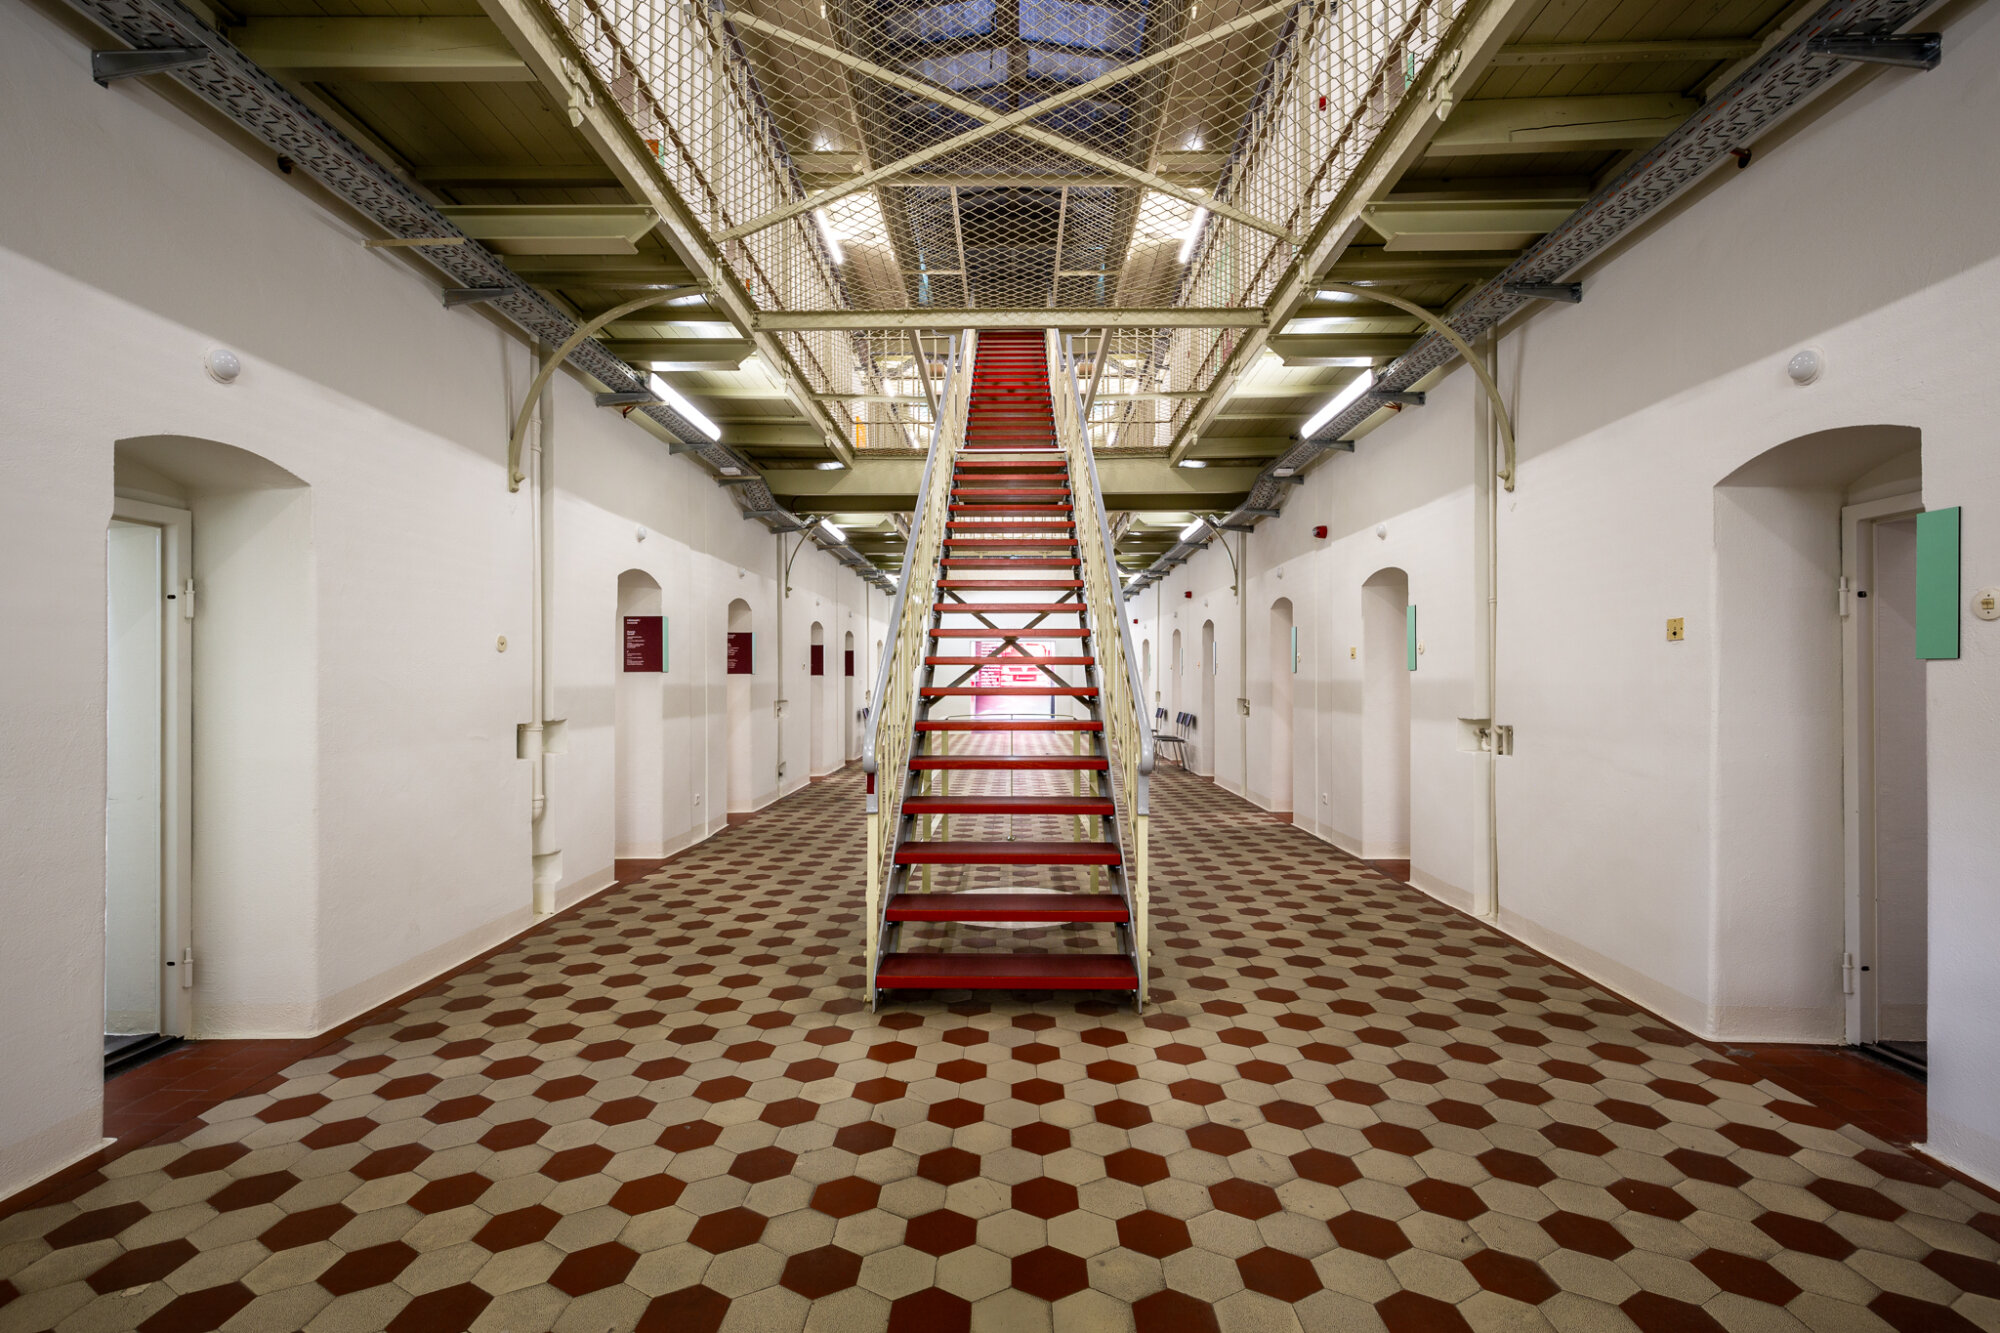 The detention hall of the former prison wing B: In the former cells, prisoners' fates are told from the time of prisoner release, Stasi pre-trial detention and the Soviet secret police NKVD/MGB, but also from the National Socialist era.